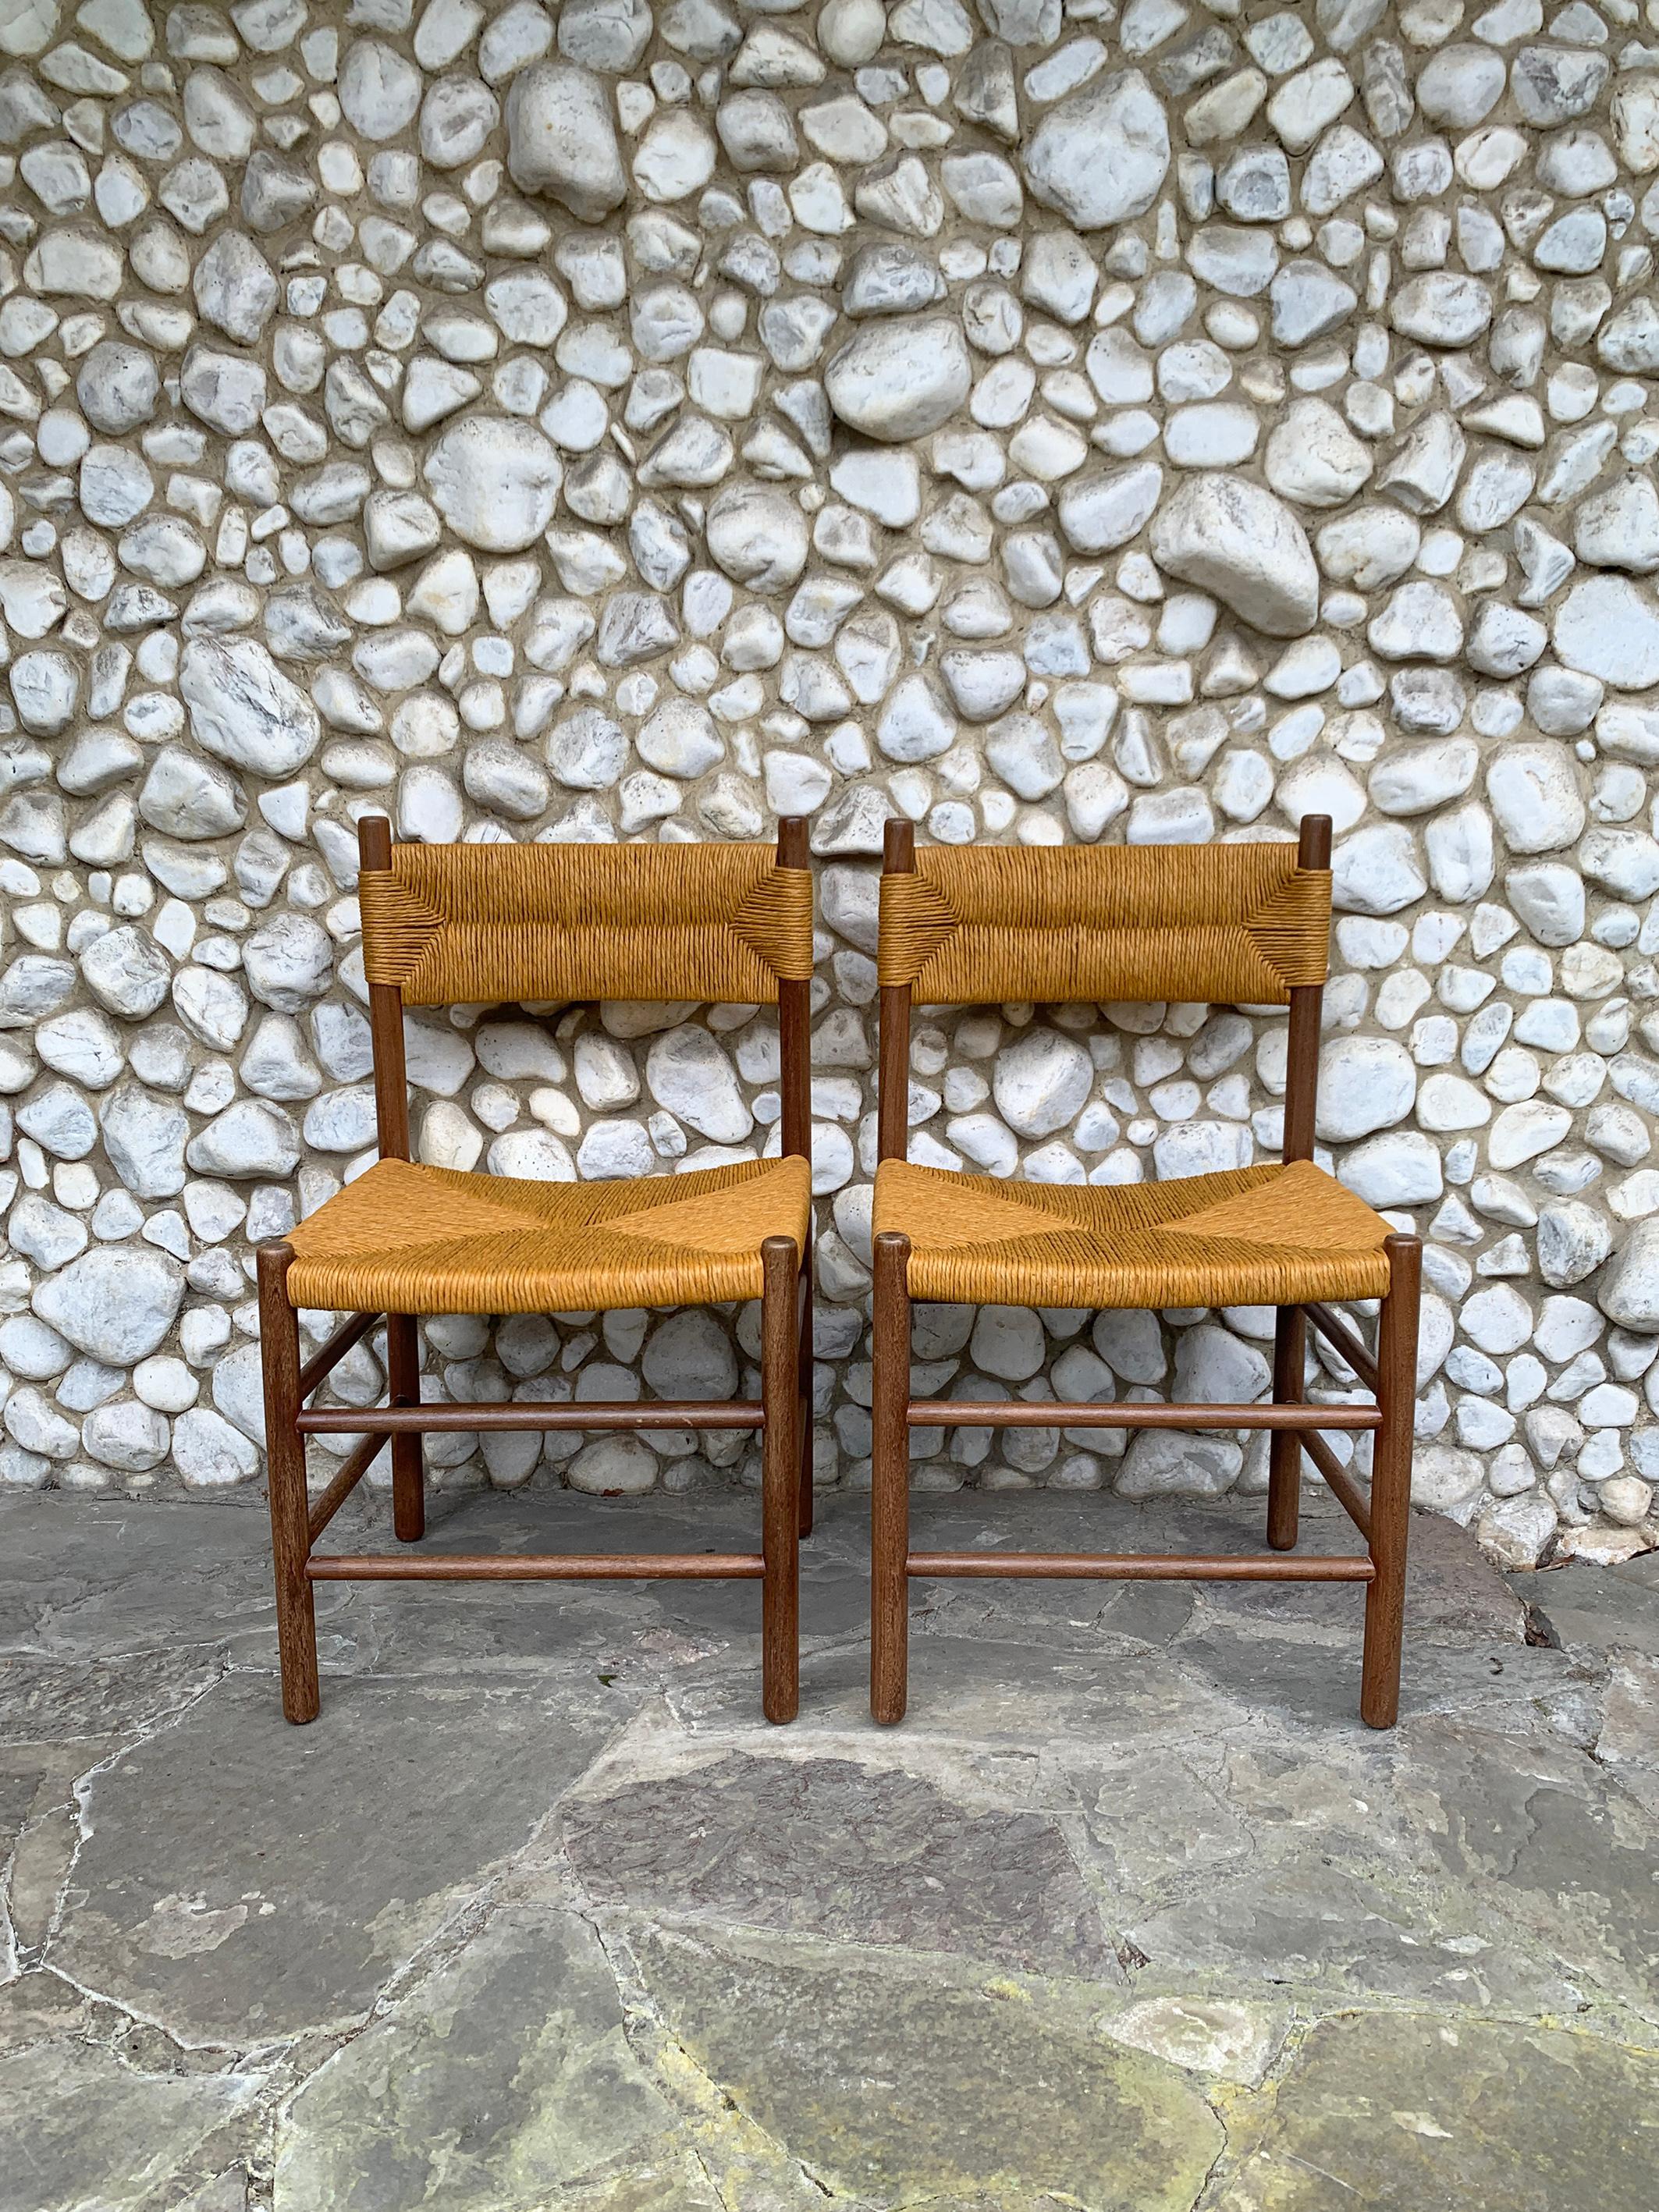 A Pair of French rush/straw dining chairs designed in the style of Charlotte Perriand Dordogne chairs. Produced circa 1960, probably by Robert Sentou, France.

The chairs are made of solid teak-wood. Freshly renewed straw/rush seats and backrests by